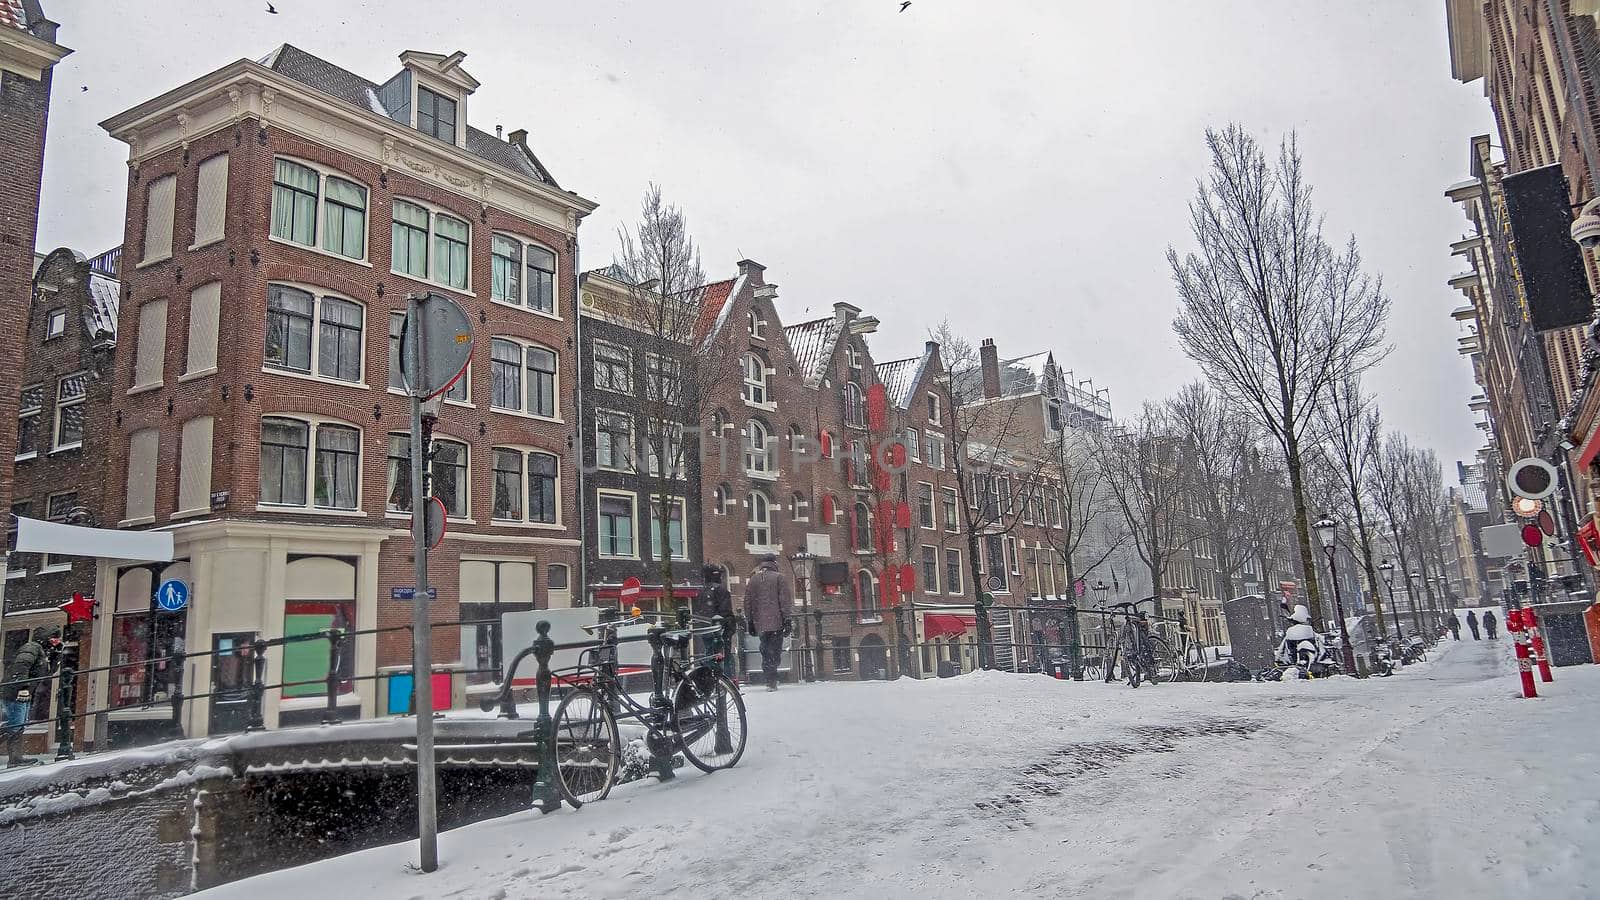 Snowy city Amsterdam in the red light disrict in the Netherlands in winter by devy